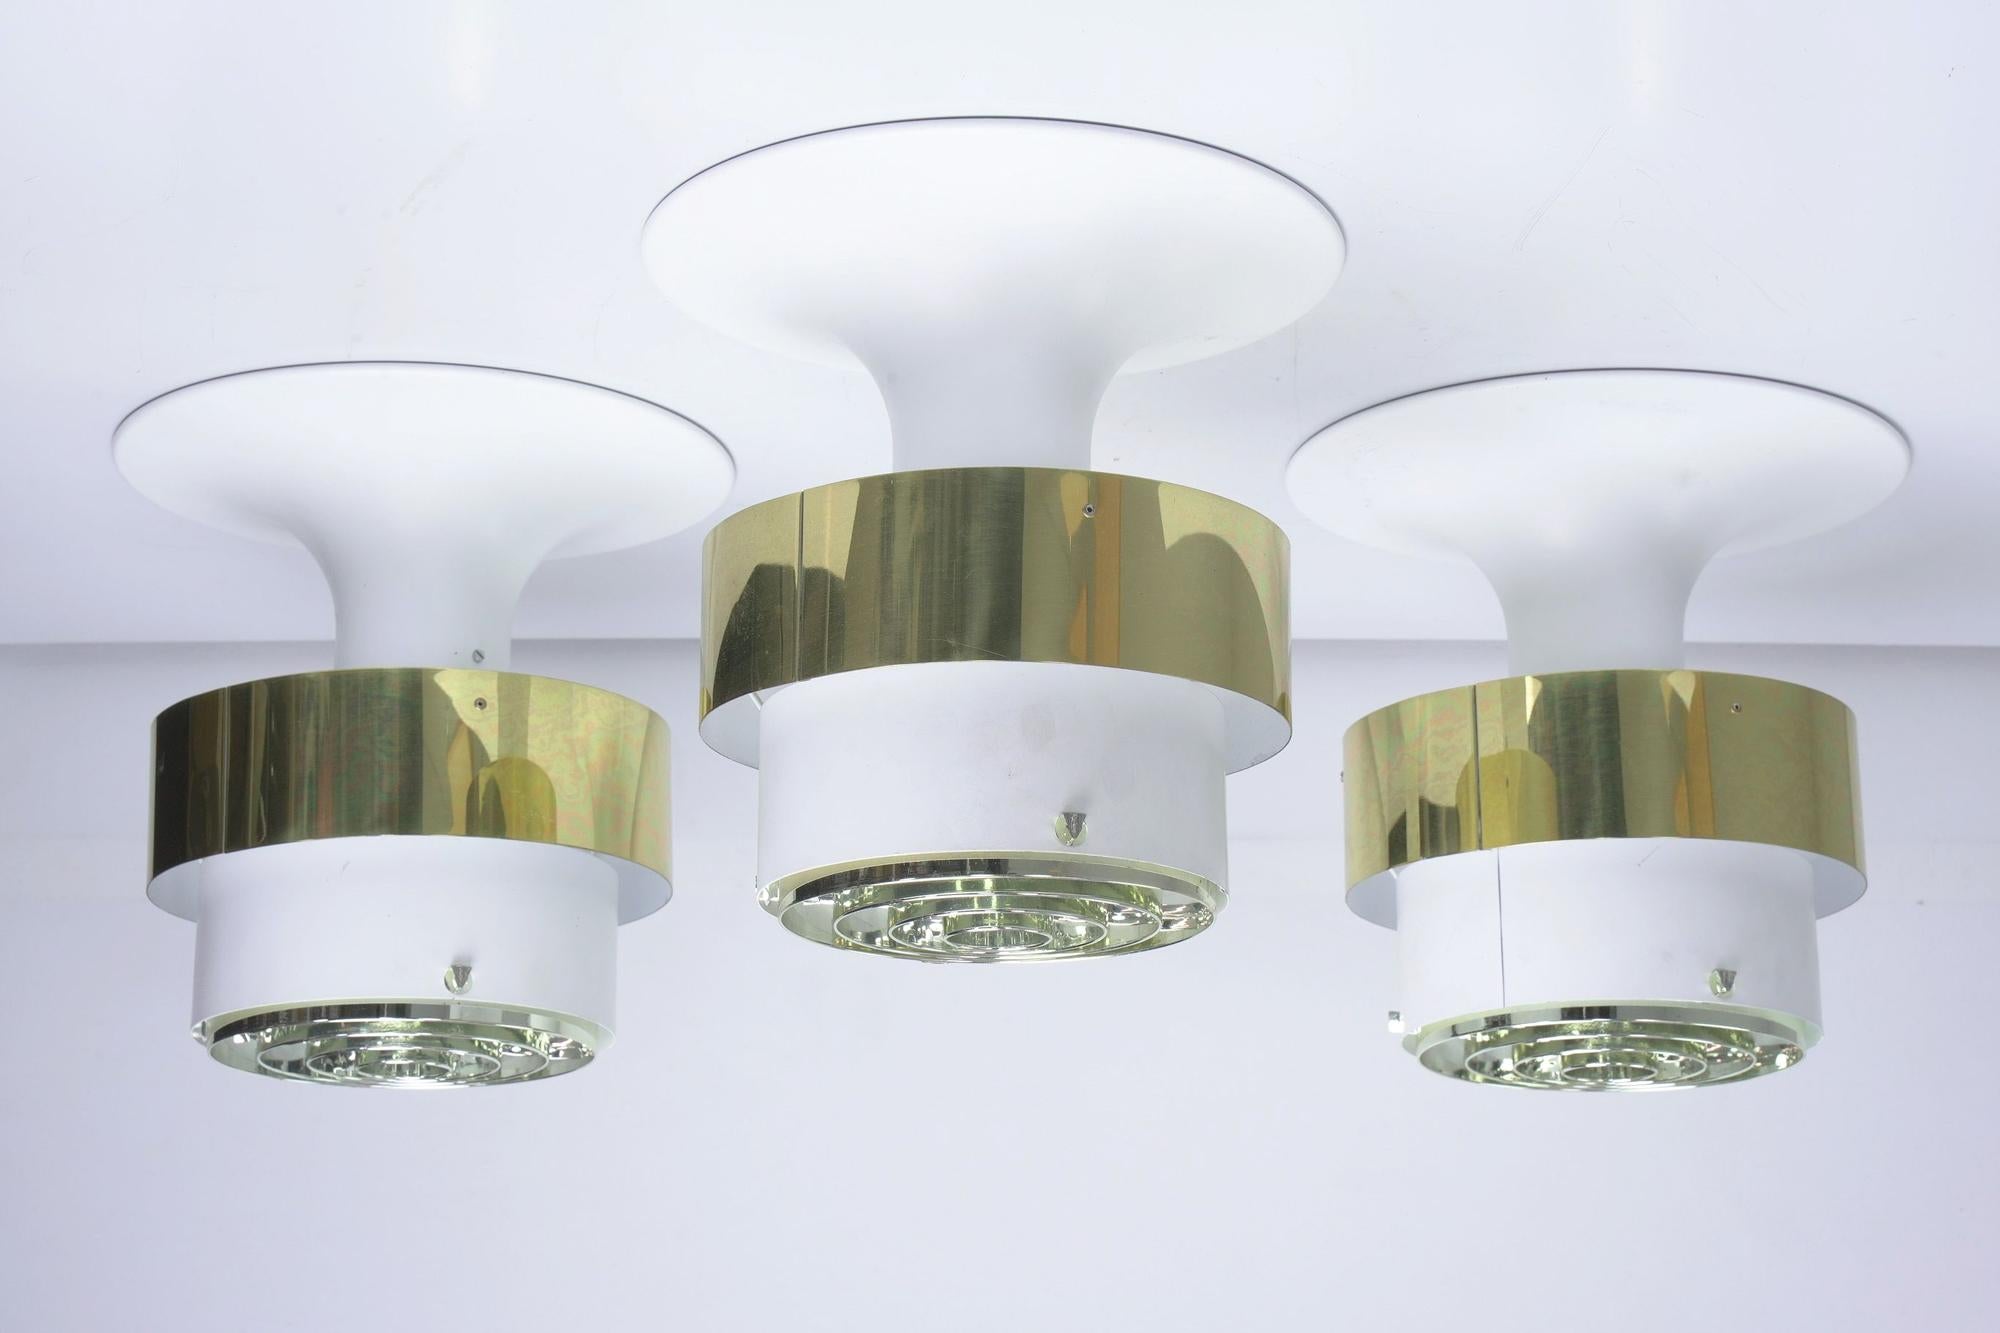 10 Scandinavian Modern Hans-Agne Jacobsson Markaryd lights. Ceiling light fixture T 771, eye-catching light by Swedish light master Hans-Agne Jakobsson. The top cone is attached directly to the ceiling and behind the golden metal band along the